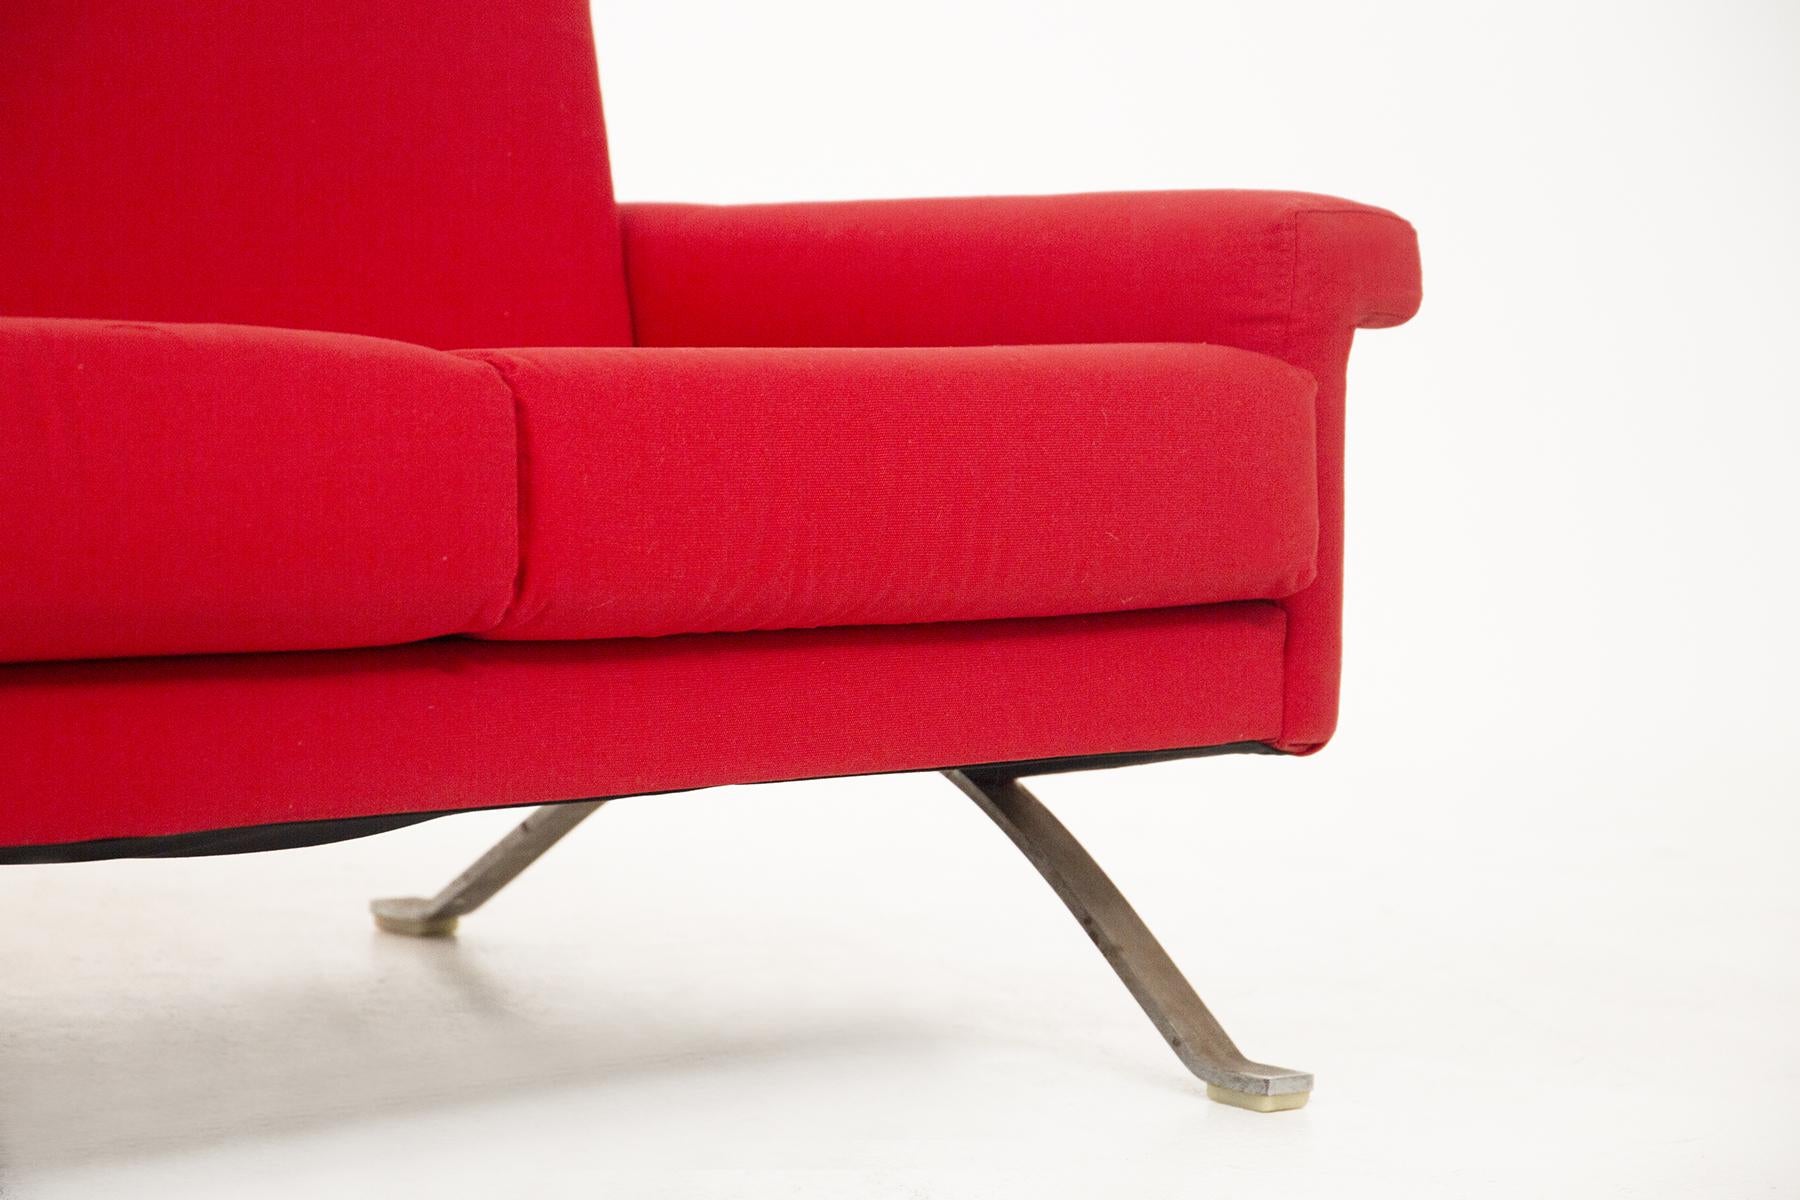 Rare Italian Red Sofa by Ico Parisi for Cassina Mod. 875, Published In Good Condition For Sale In Milano, IT